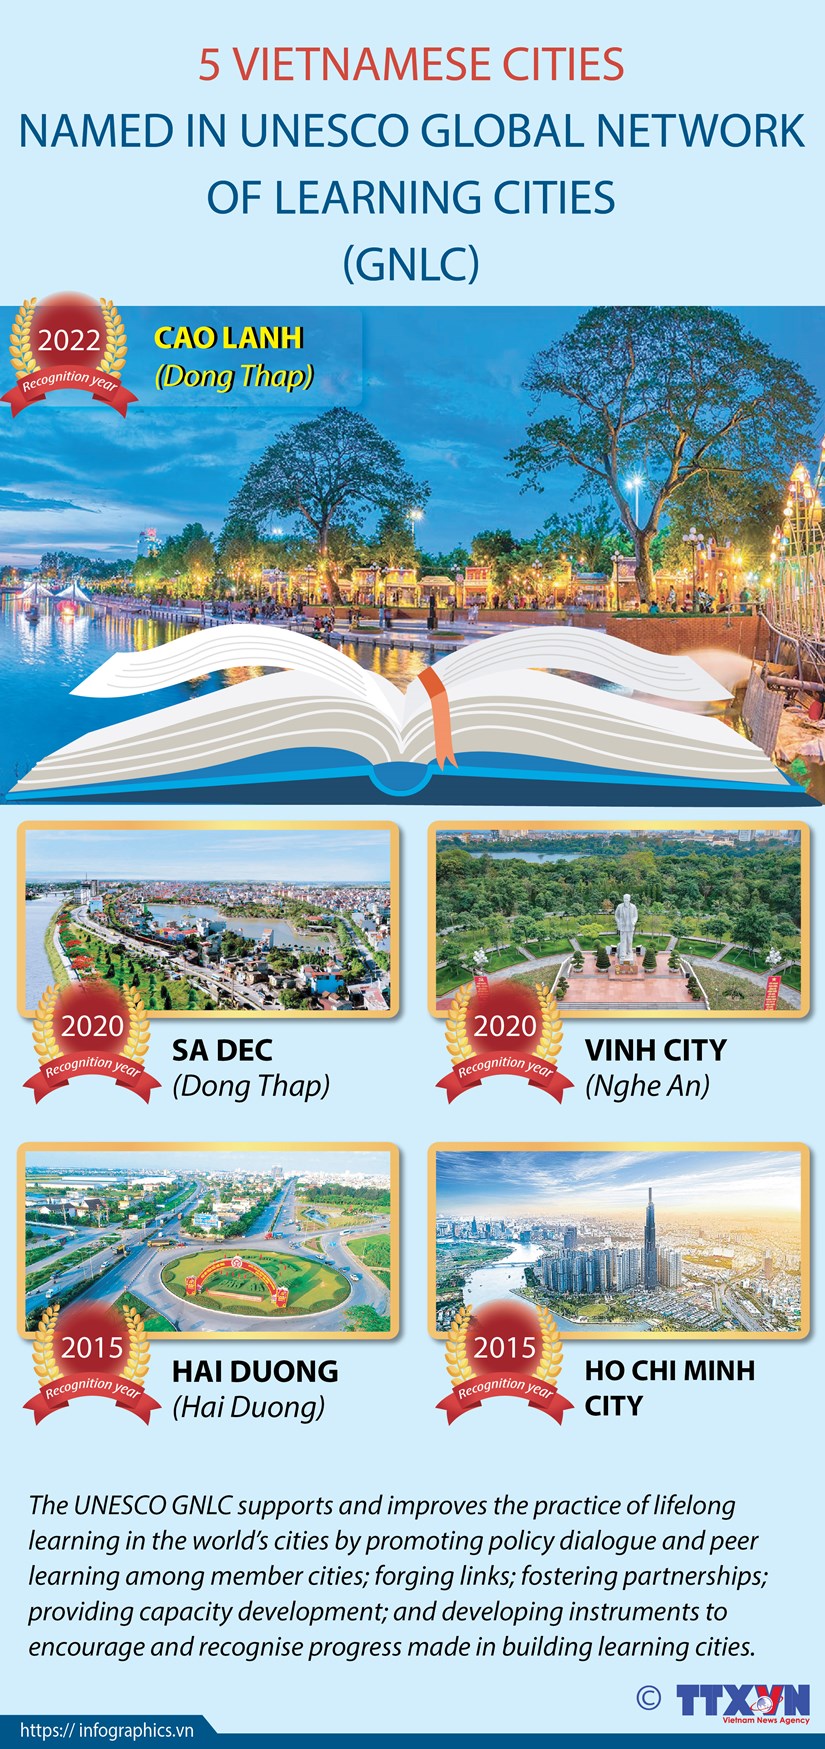 Vietnamese localities named in UNESCO Global Network of Learning Cities hinh anh 1